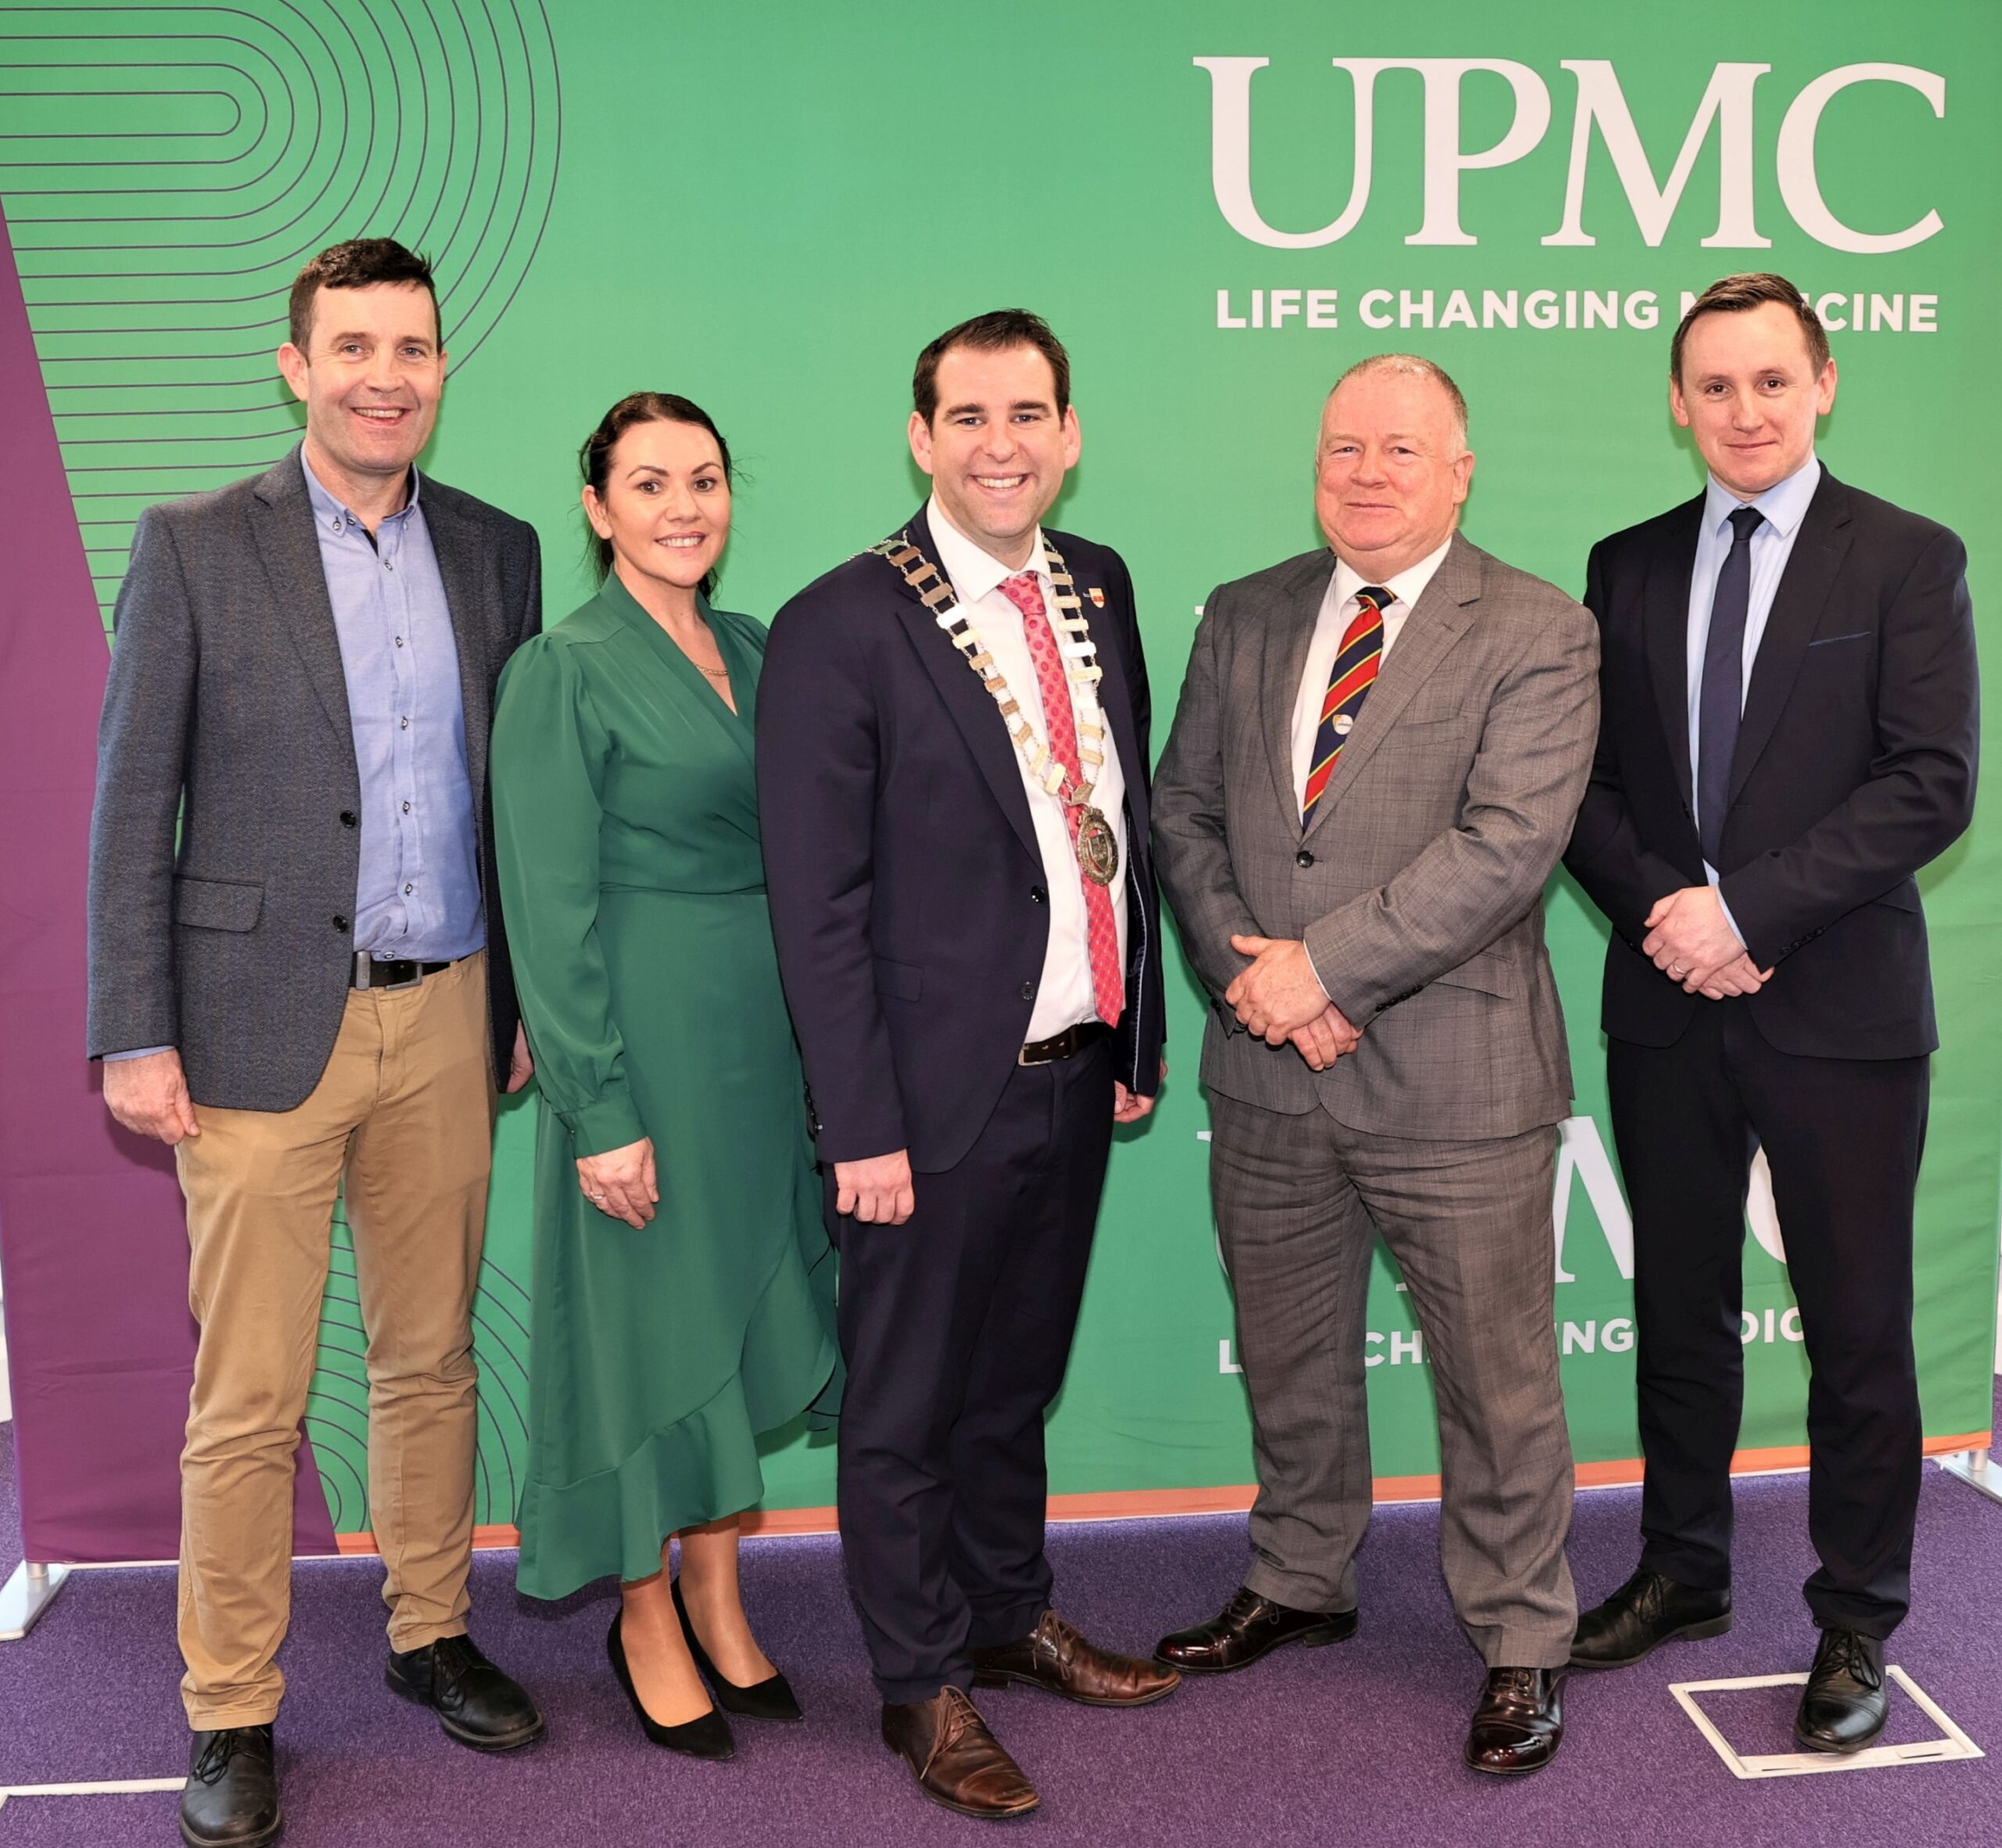 Colin Doyle, Chair Carlow LGFA, Miriam Griffin, UPMC Centre Carlow, Fintan Phelan, Mayor of the Carlow Municipal District, Jim Bolger, Chairman of Carlow GAA, and John Windle, General Manager UPMC Sports Medicine.